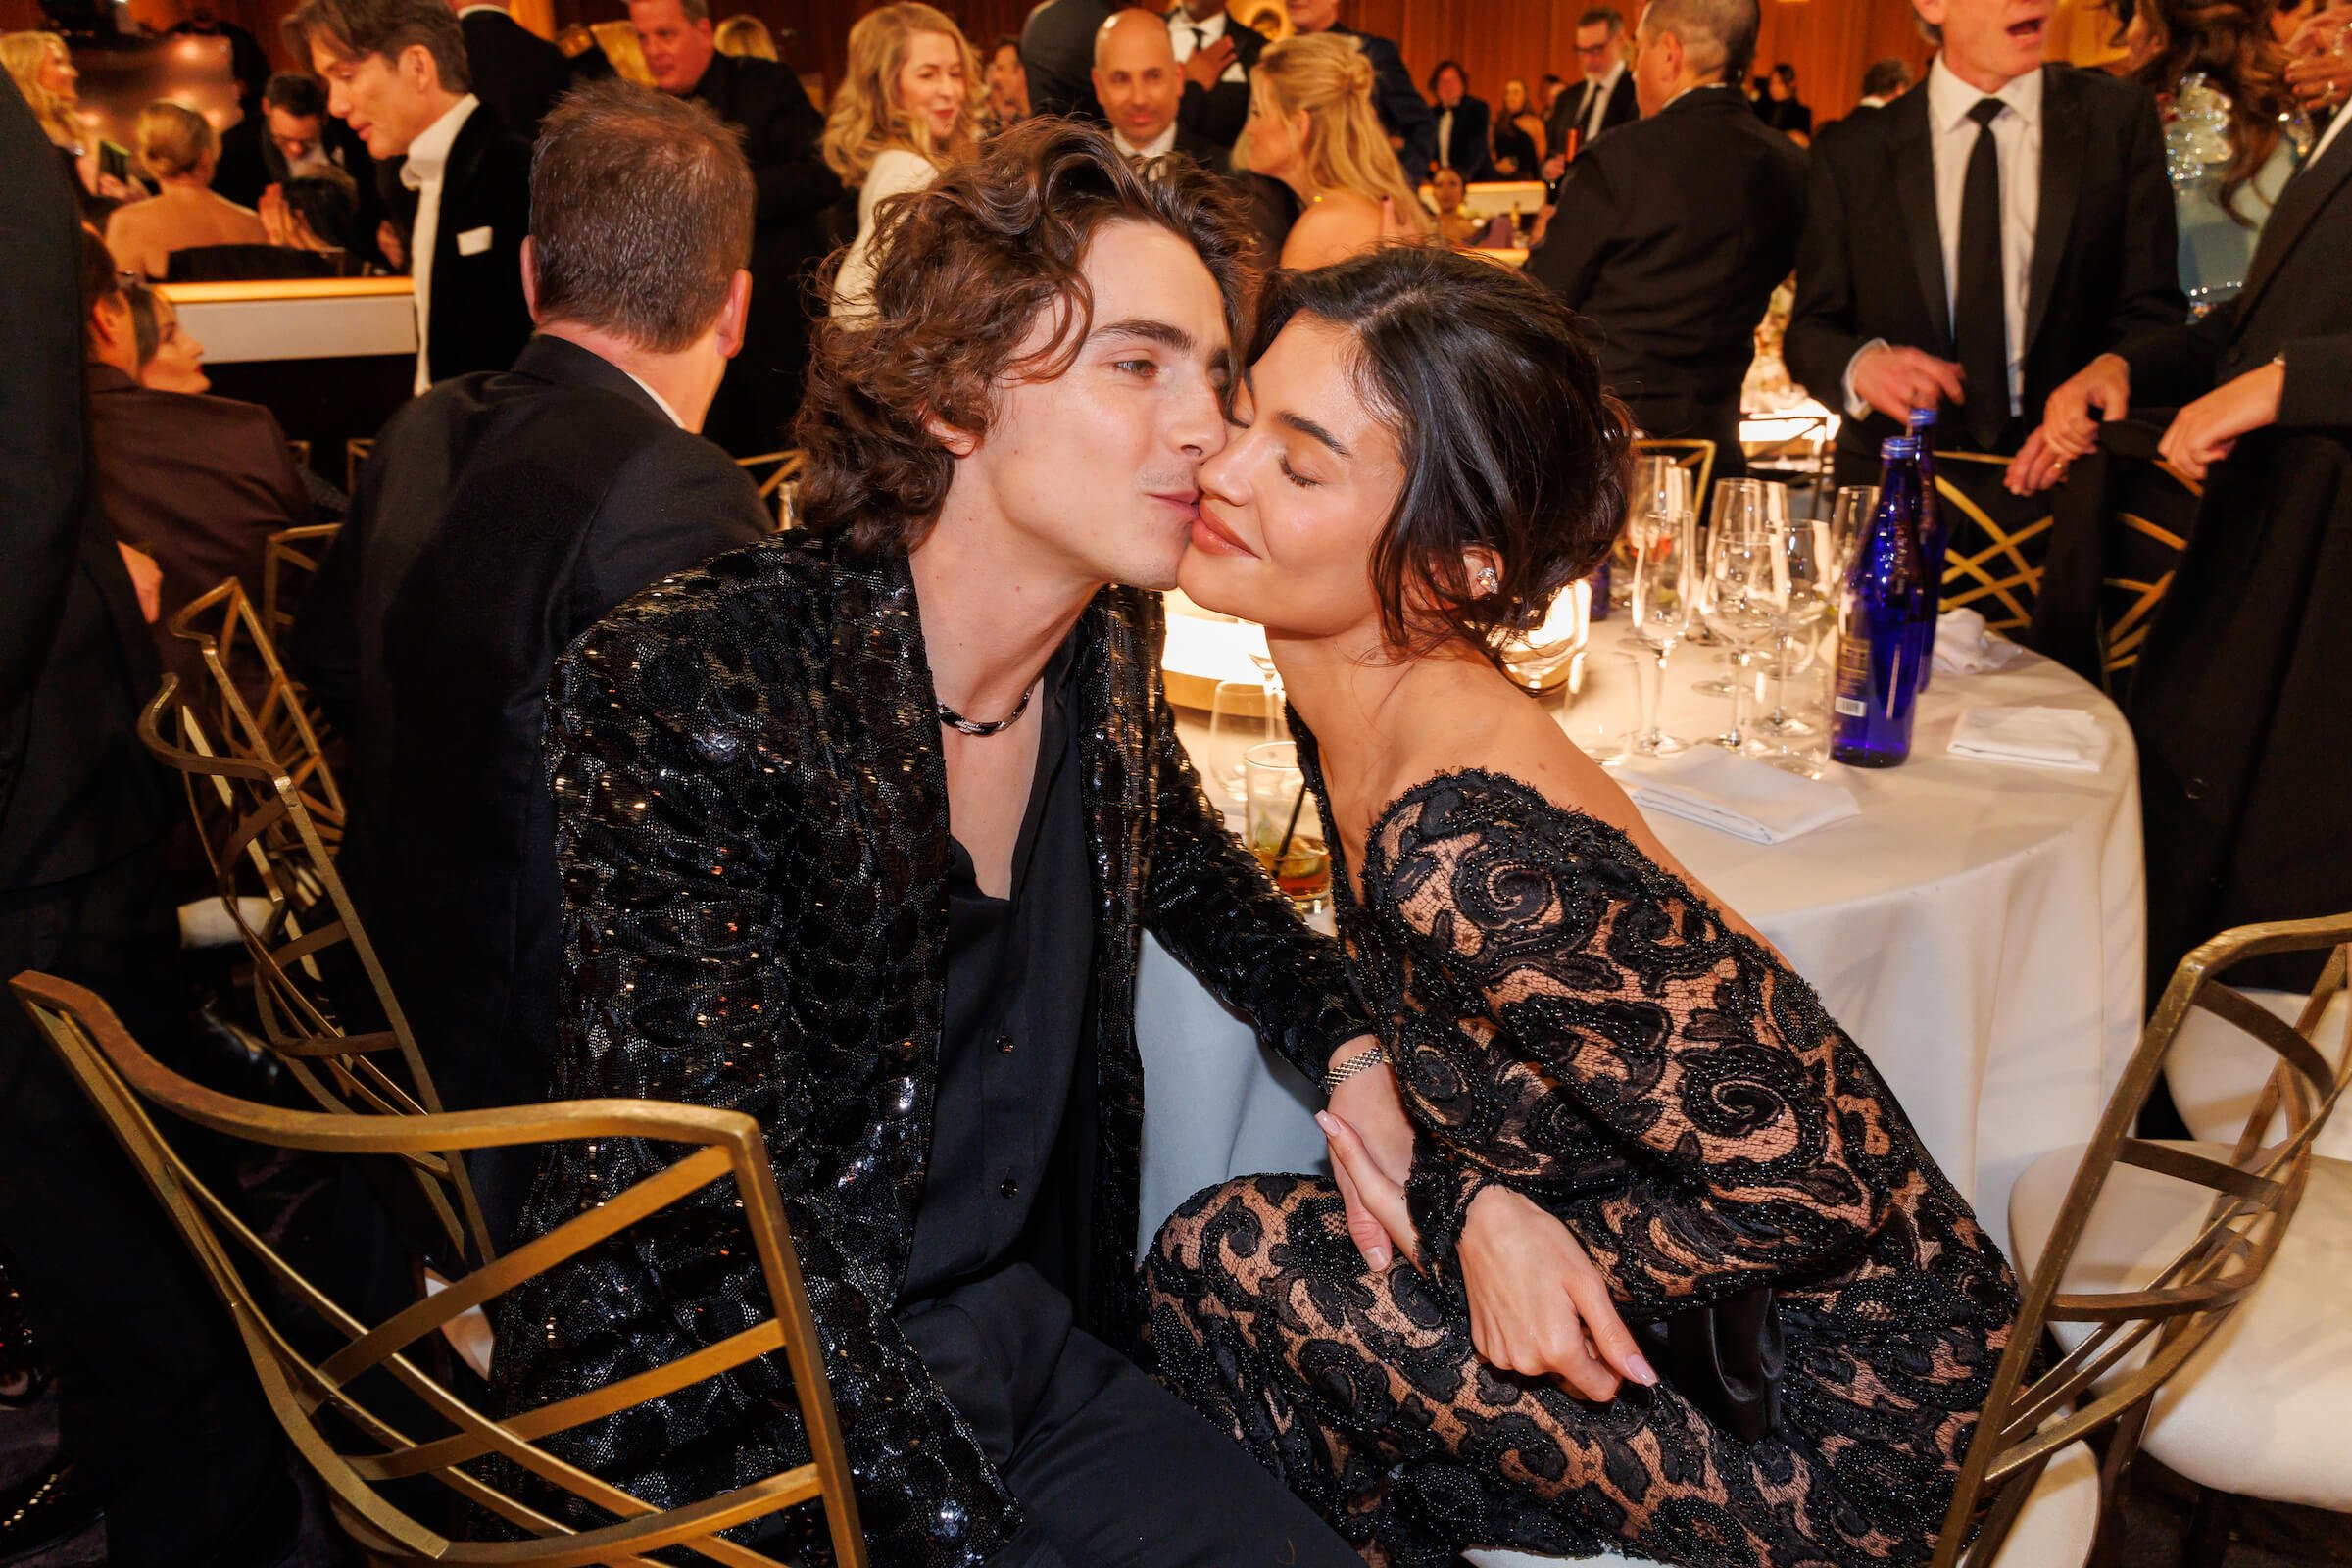 Timothée Chalamet kissing Kylie Jenner on the cheek as they sit at a table at the 81st Golden Globe Awards. He is wearing a low-cut black suit and she is wearing a long-sleeve black and tan dress.